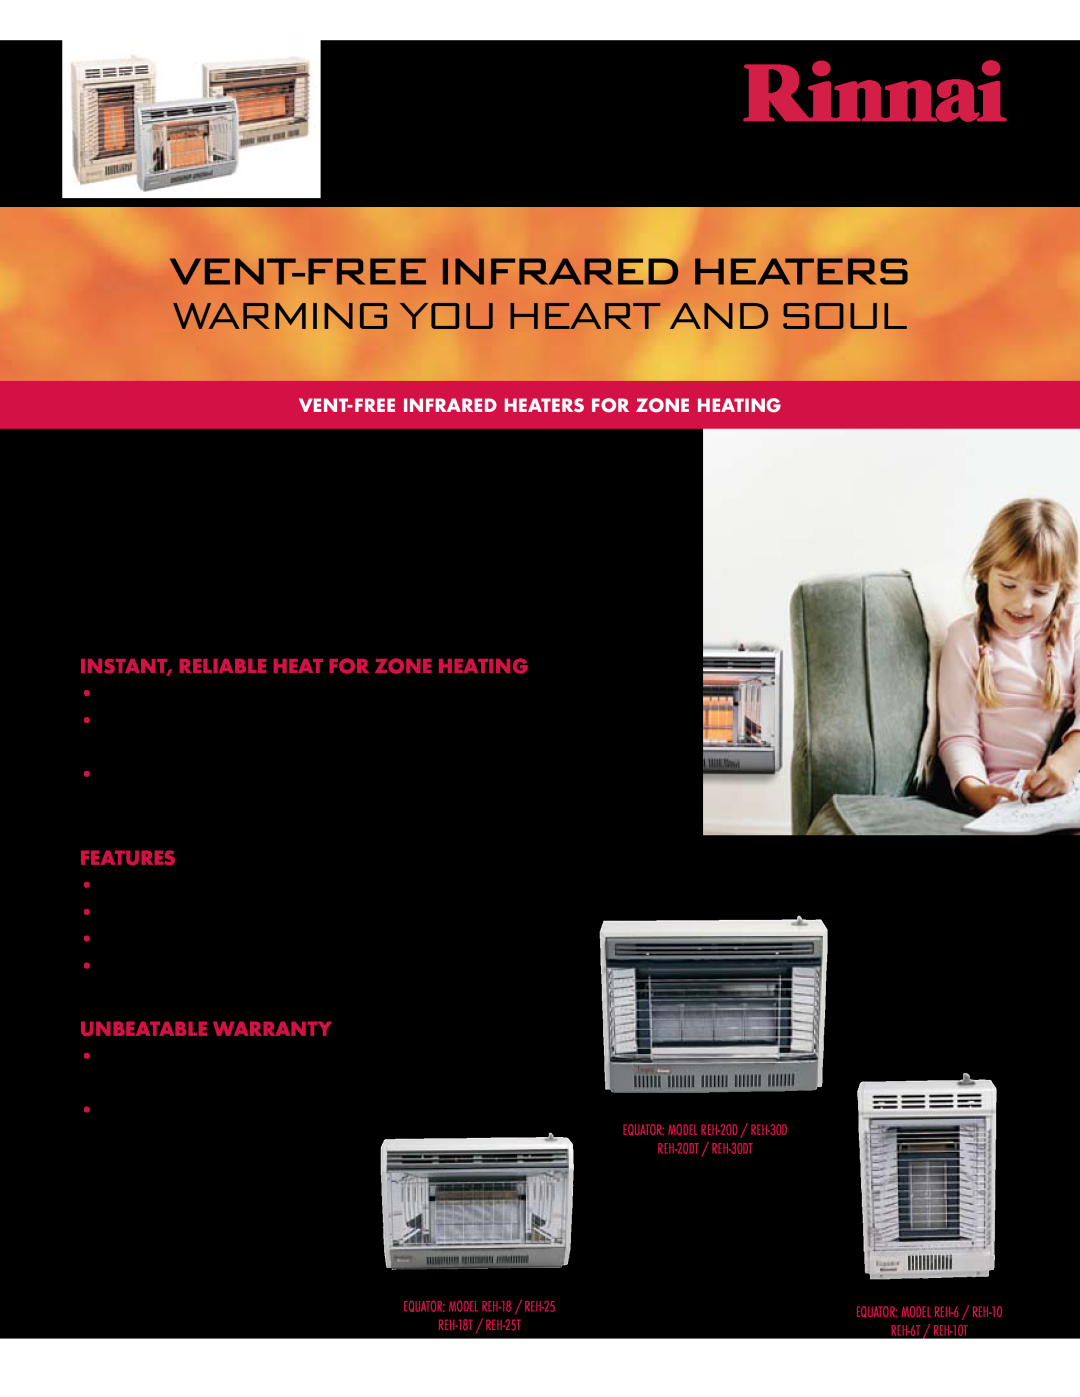 Rinnai REH-6 warranty Vent-Freeinfrared Heaters, Warming You Heart And Soul, Never Be Left Out In The Cold Again, Features 